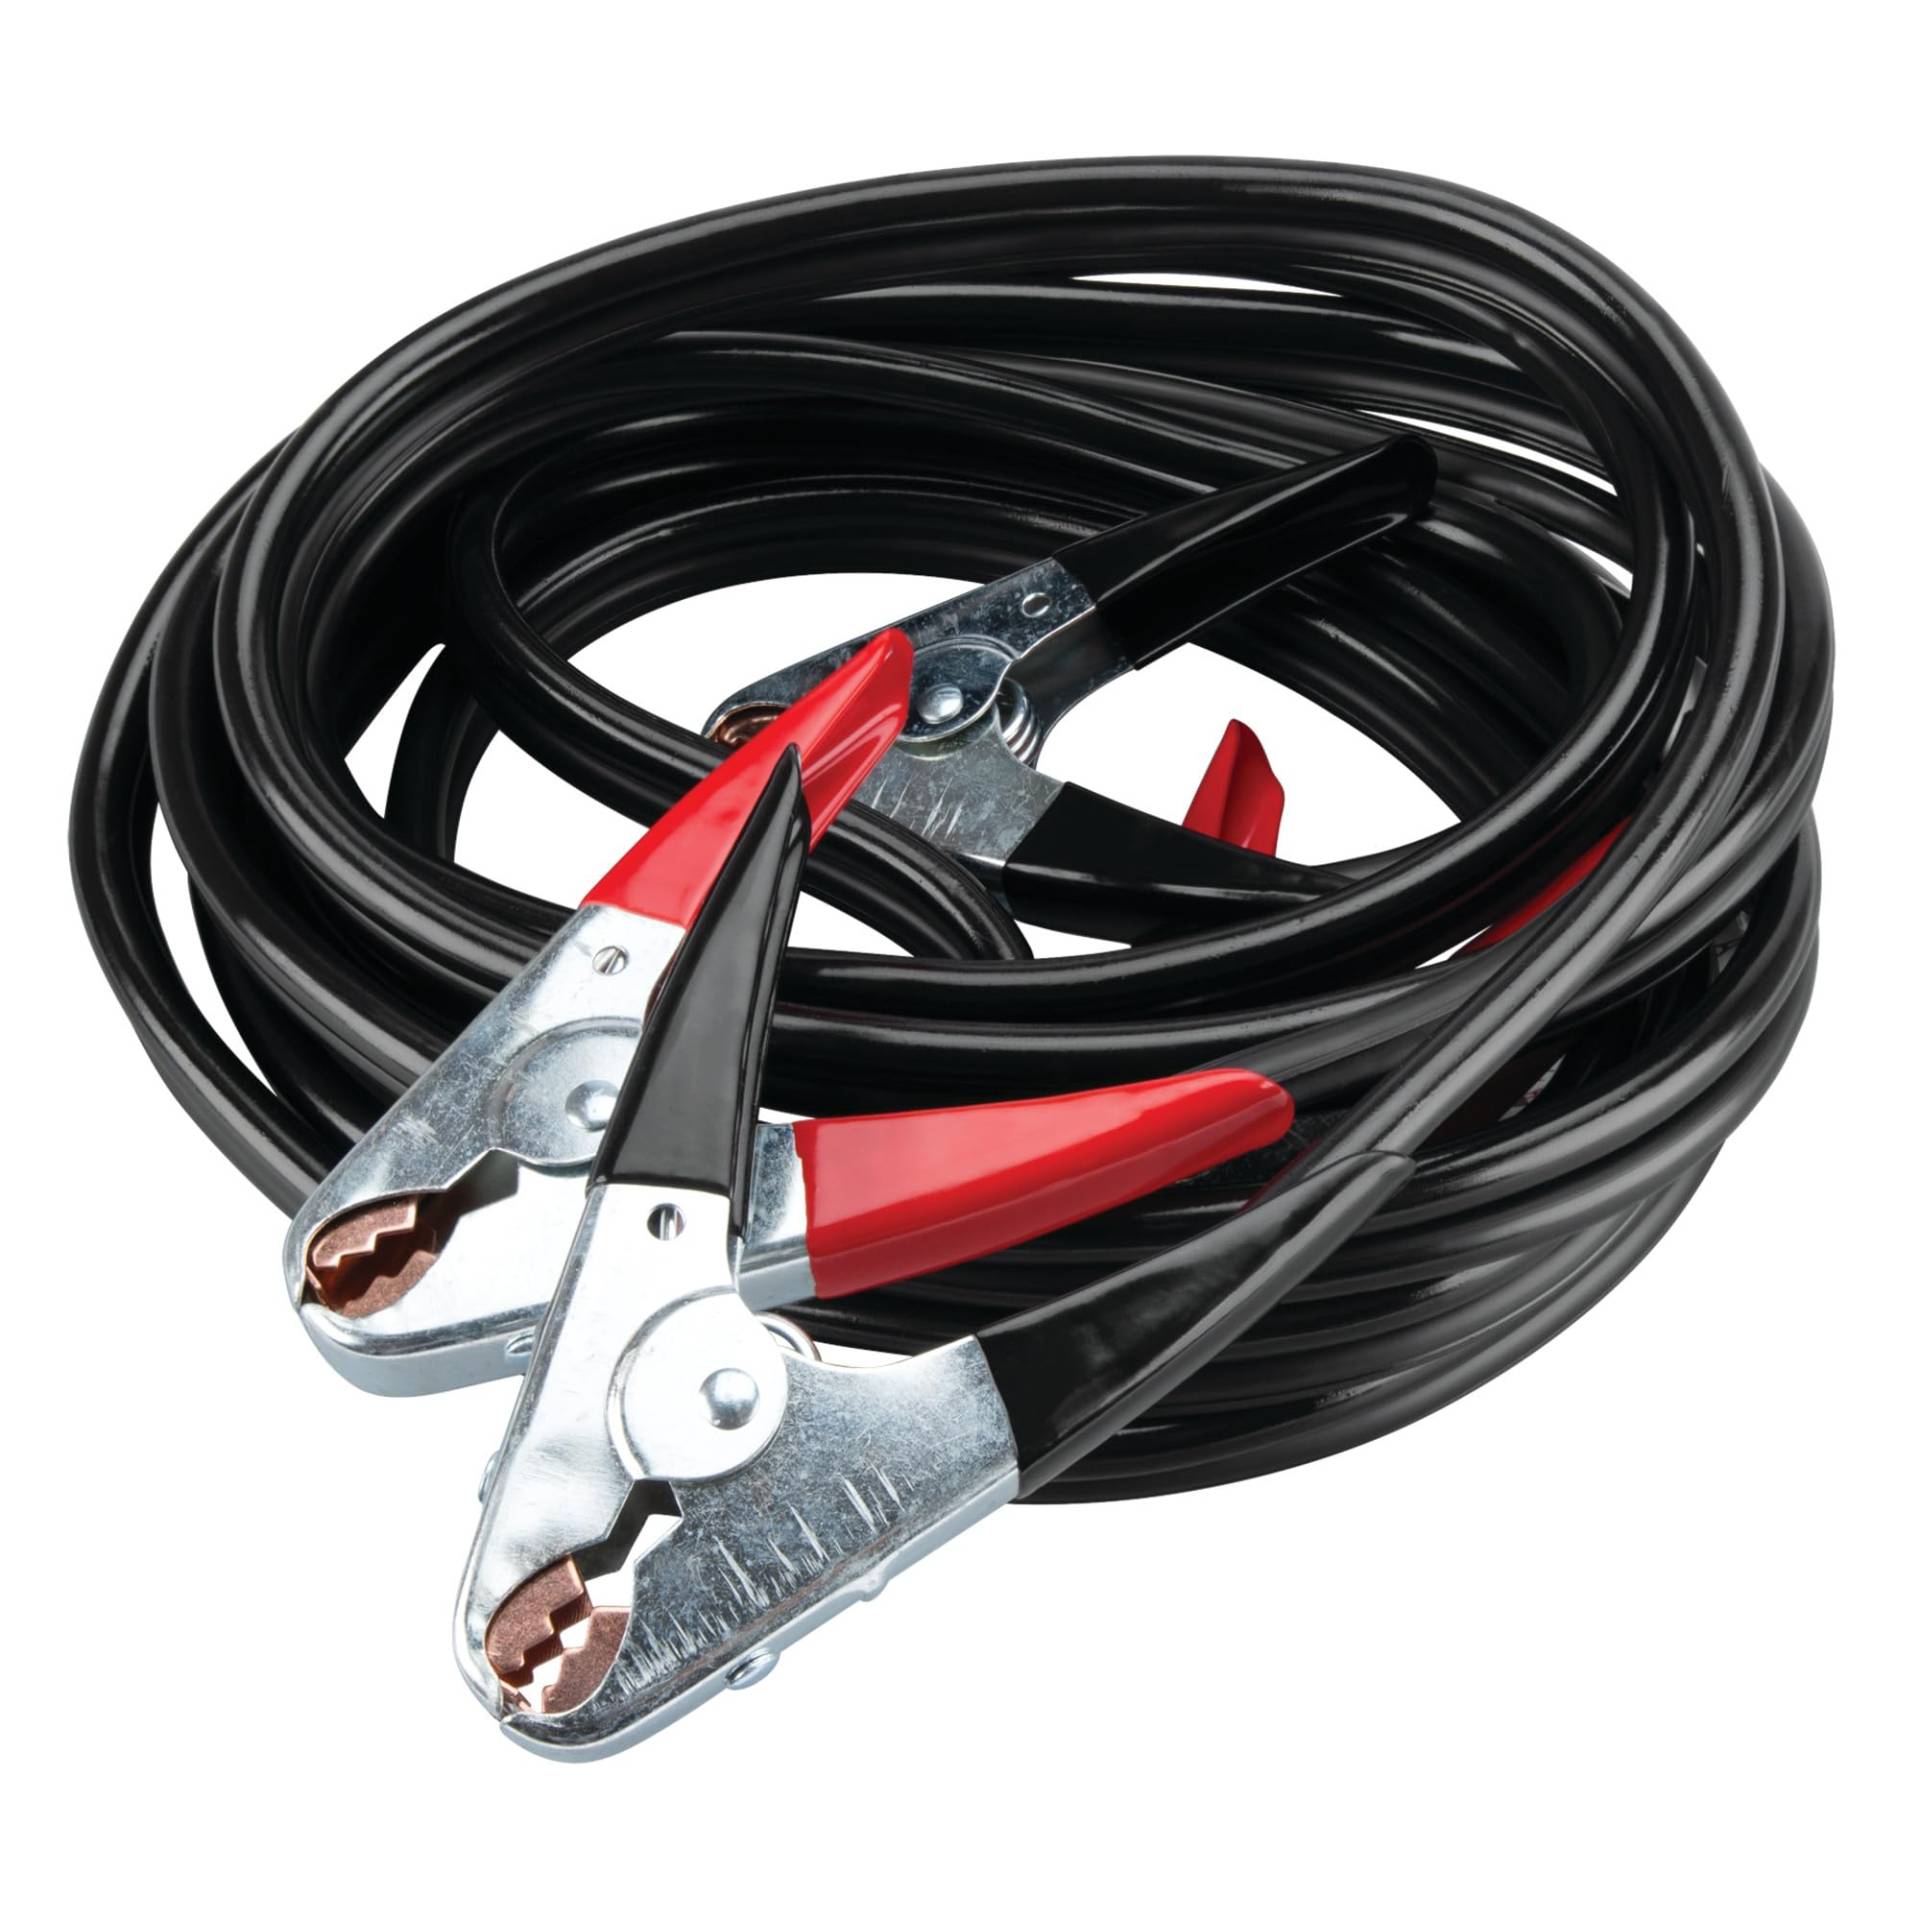 Performance Tool W1669 20' Commercial Duty 2-Gauge 800 PEAK AMP All Weather Jumper Cables for Tractors, Semis, Buses, and RVs von PERFORMANCE TOOL